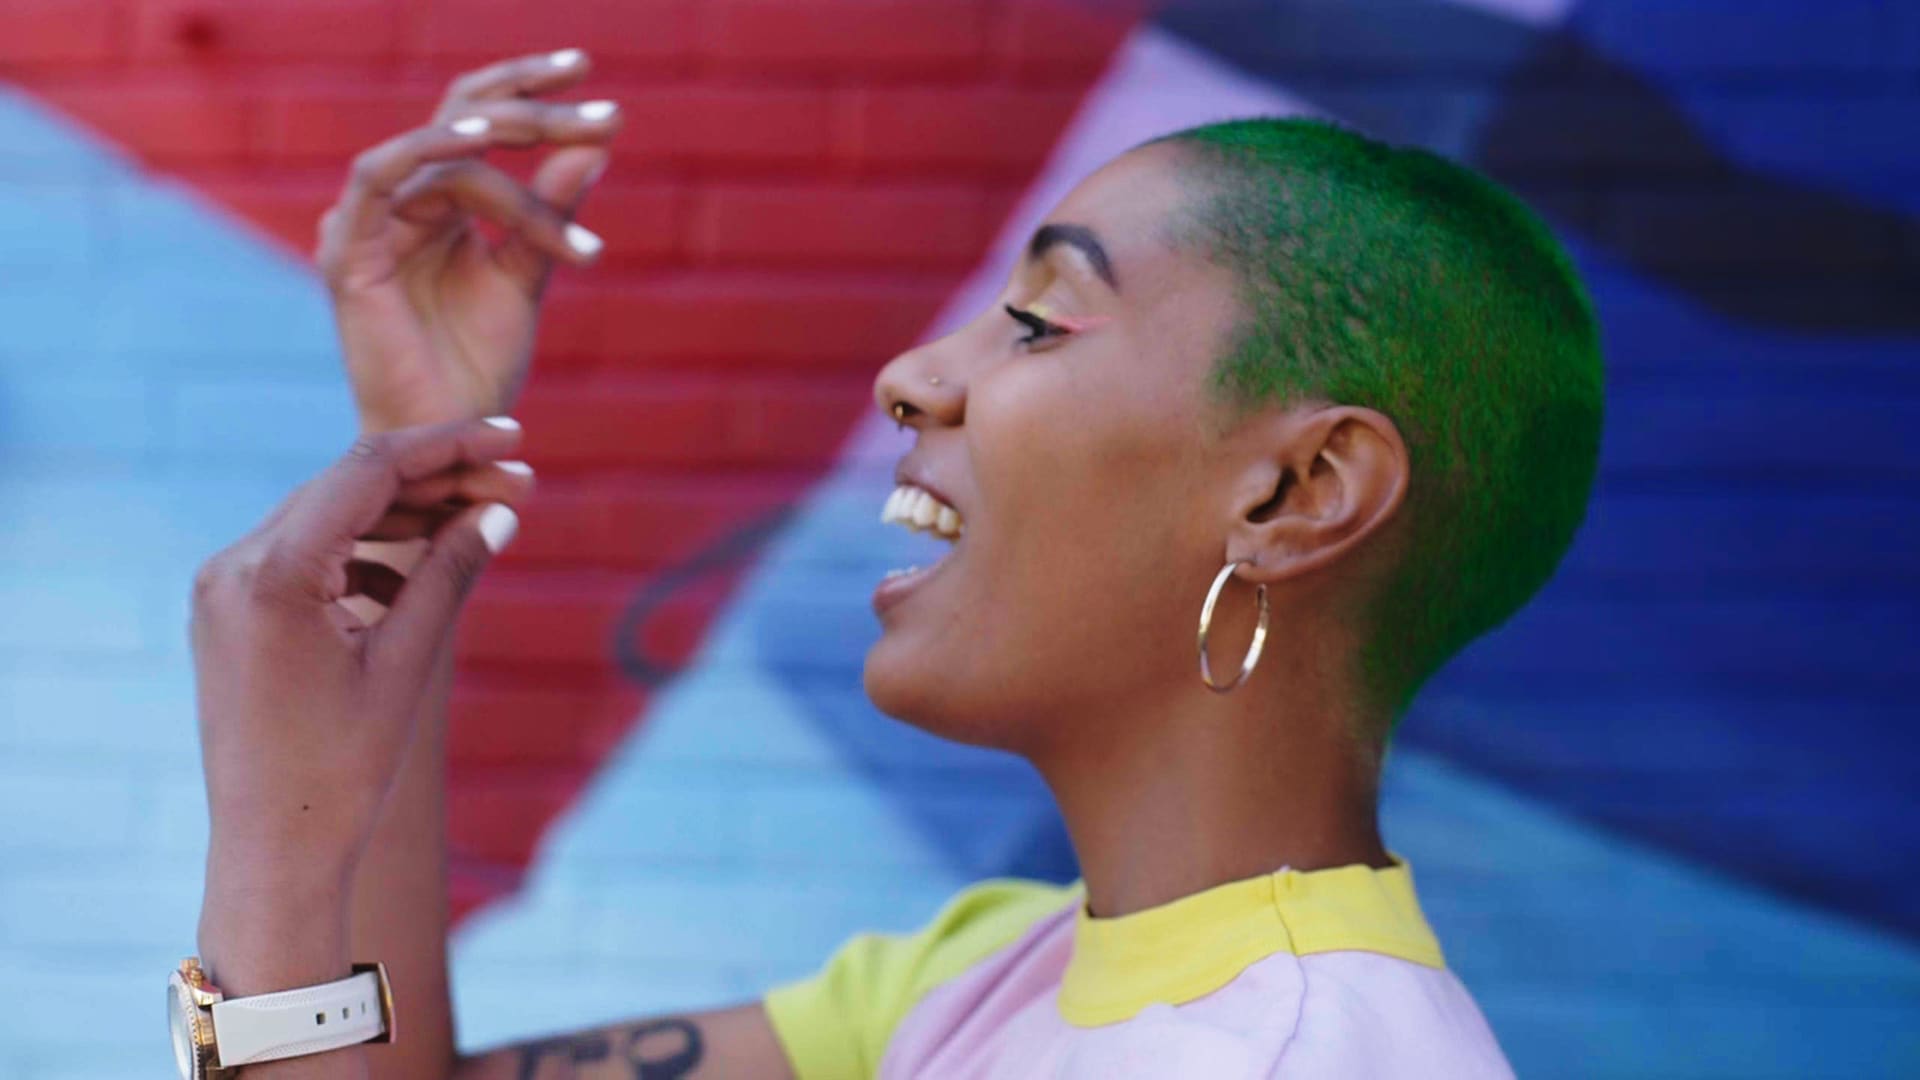 TikTok creator and musician Hannah Chelan inspired Sally Beauty's new marketing campaign. She shared a song about colored hair that went viral on the social media platform.